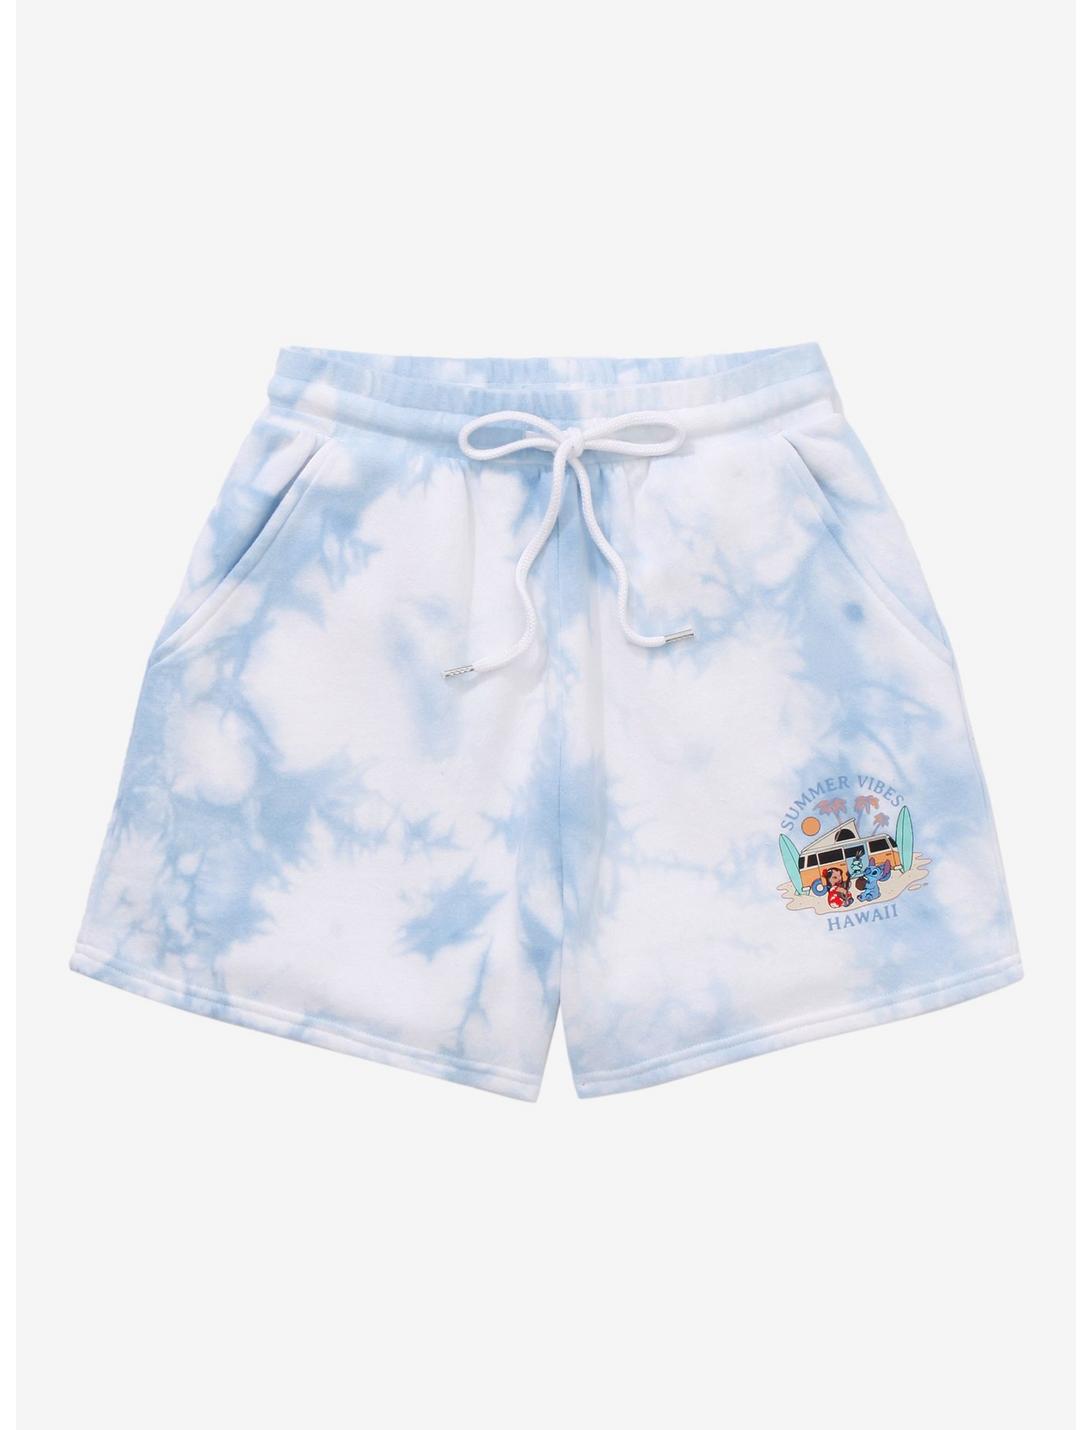 Disney Lilo & Stitch Summer Vibes Shorts - BoxLunch Exclusive, LIGHT BLUE, hi-res